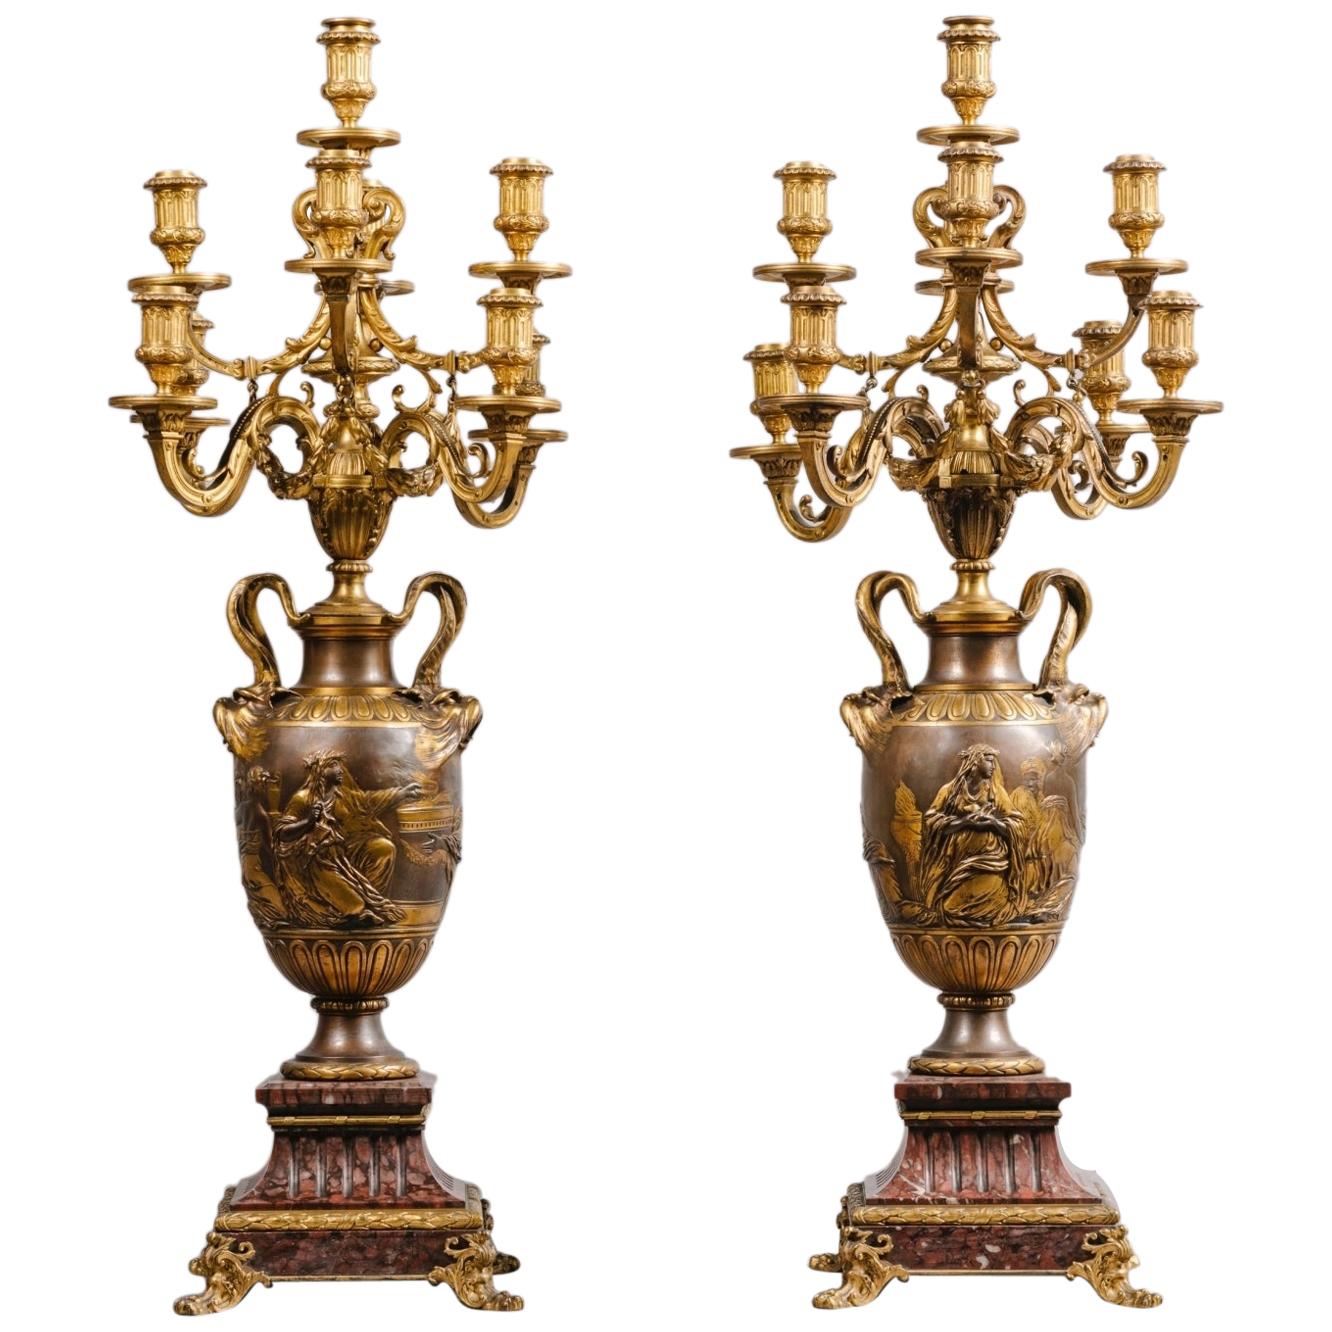 Pair of Patinated Bronze Nine-Light Candelabra by Barbedienne